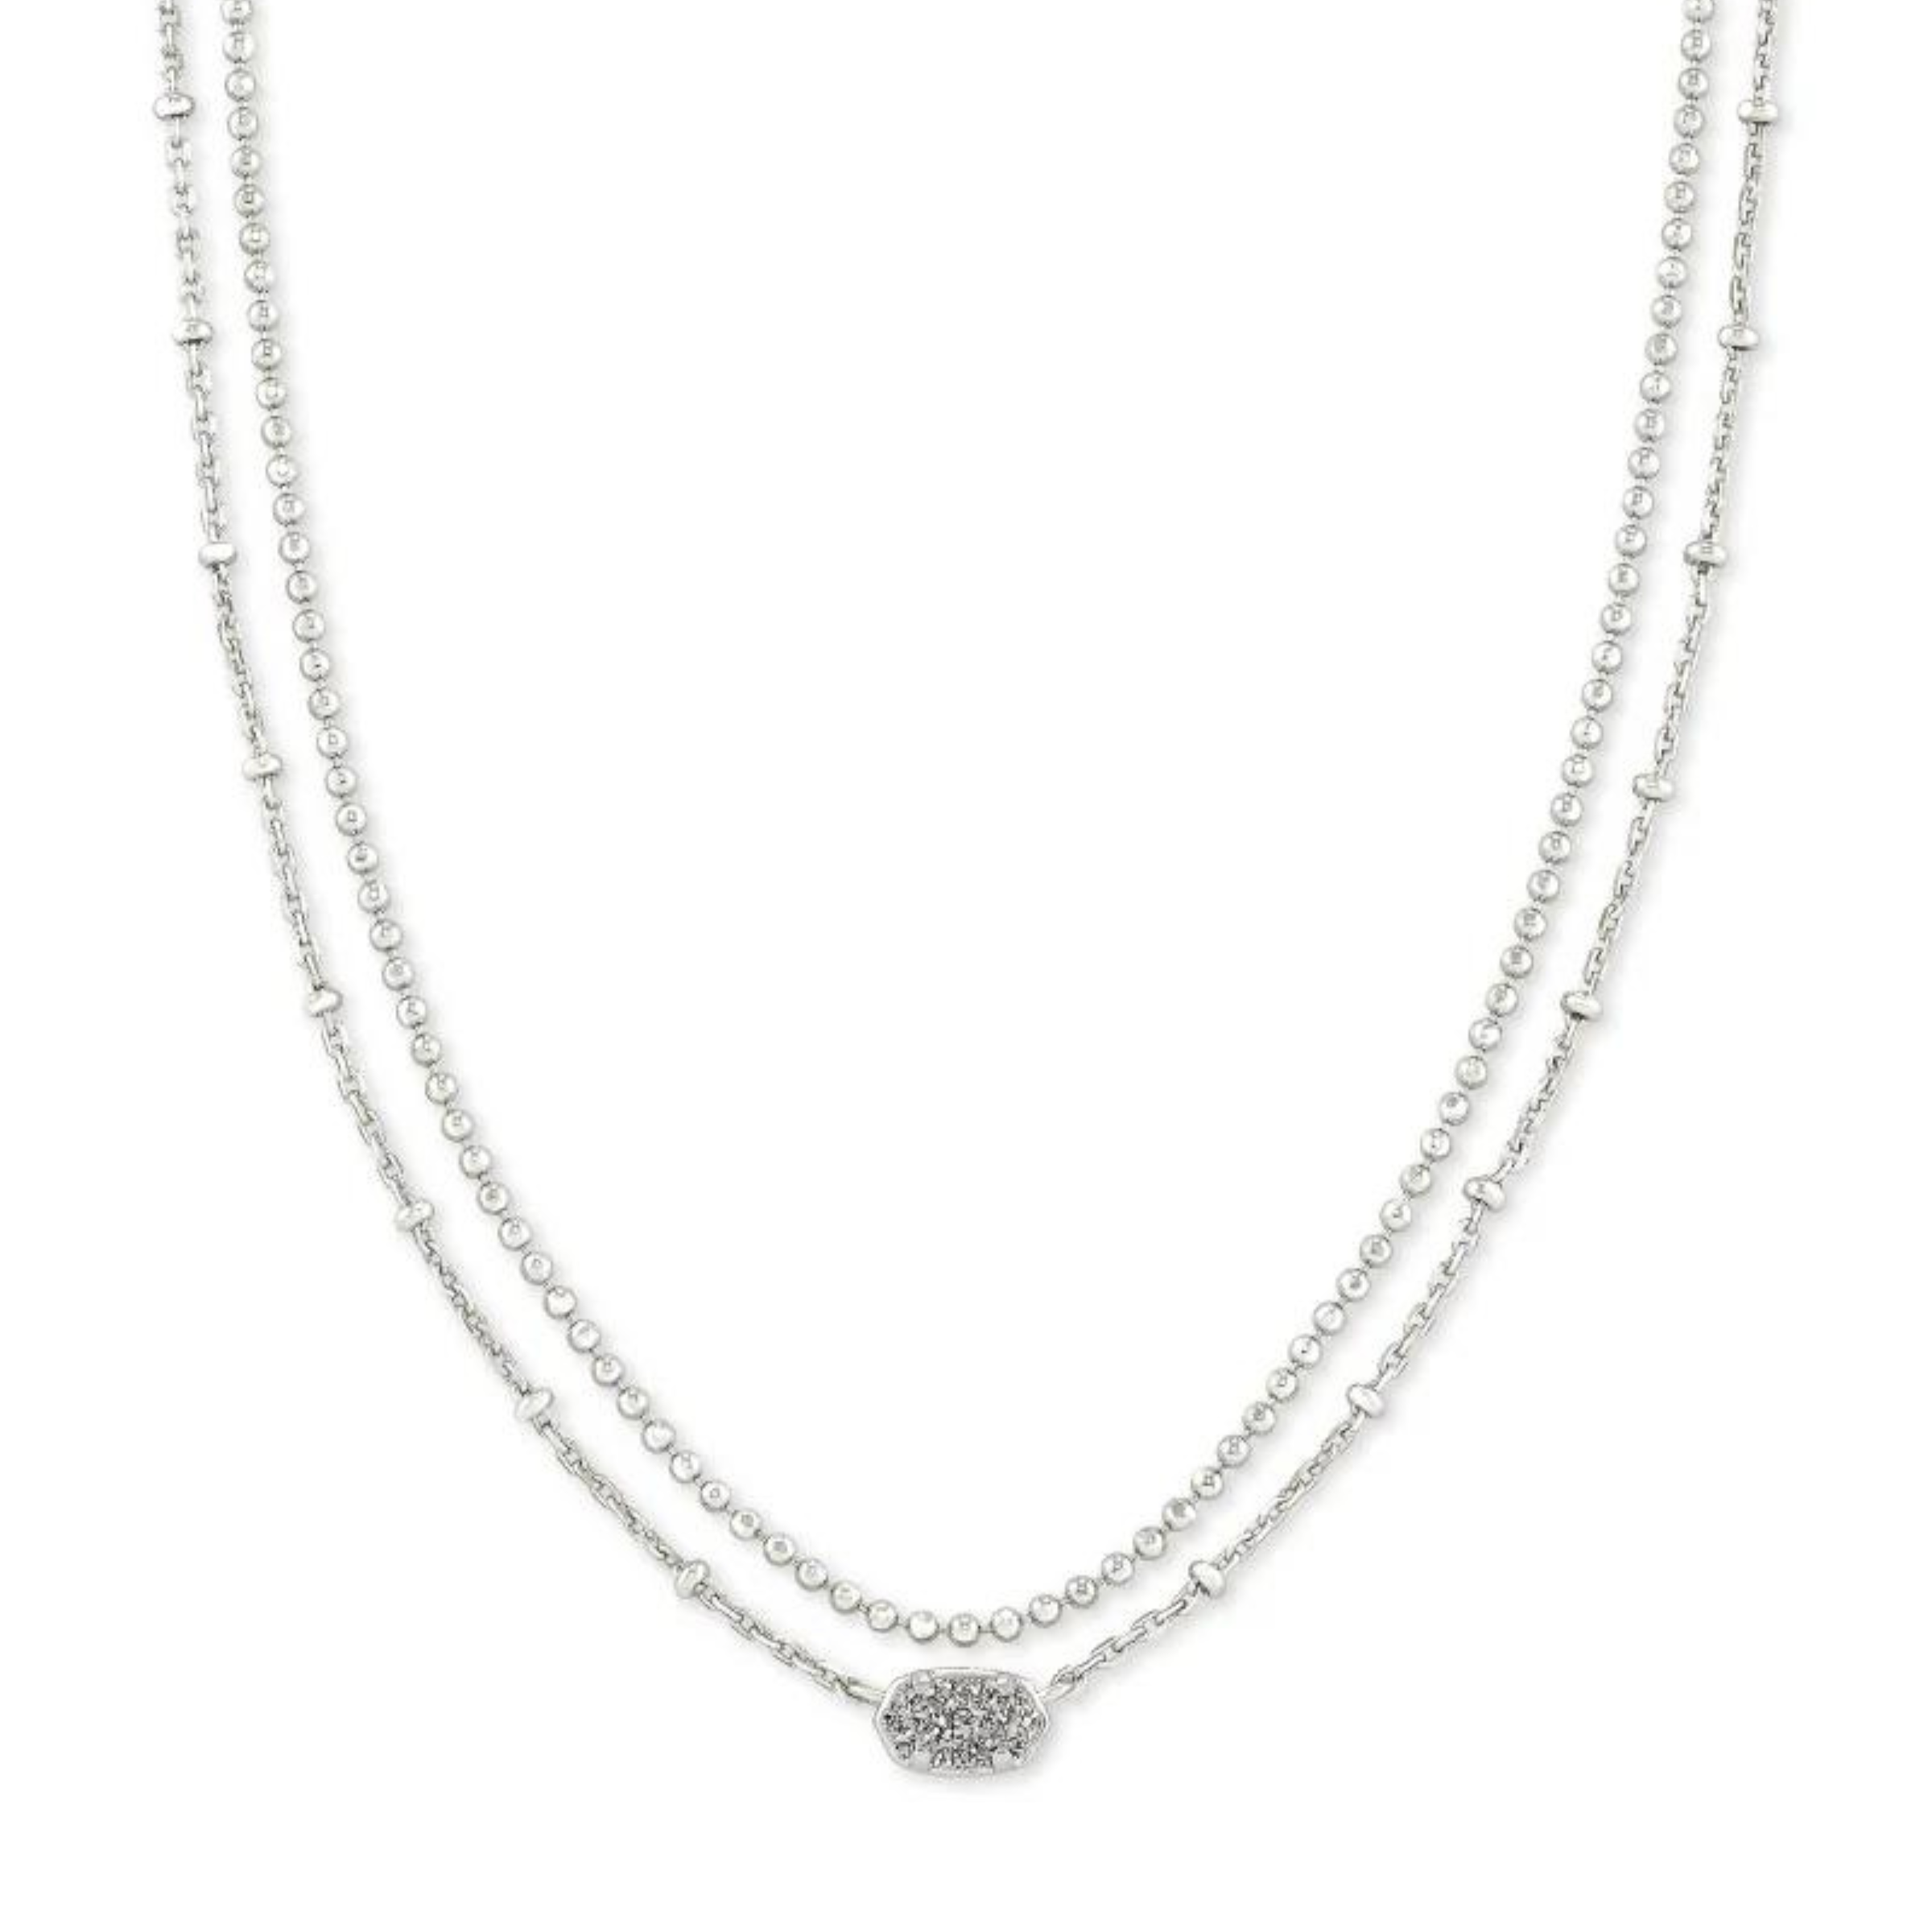 Thin, double silver necklace with small, oval drusy pendant pictured on a white background. 